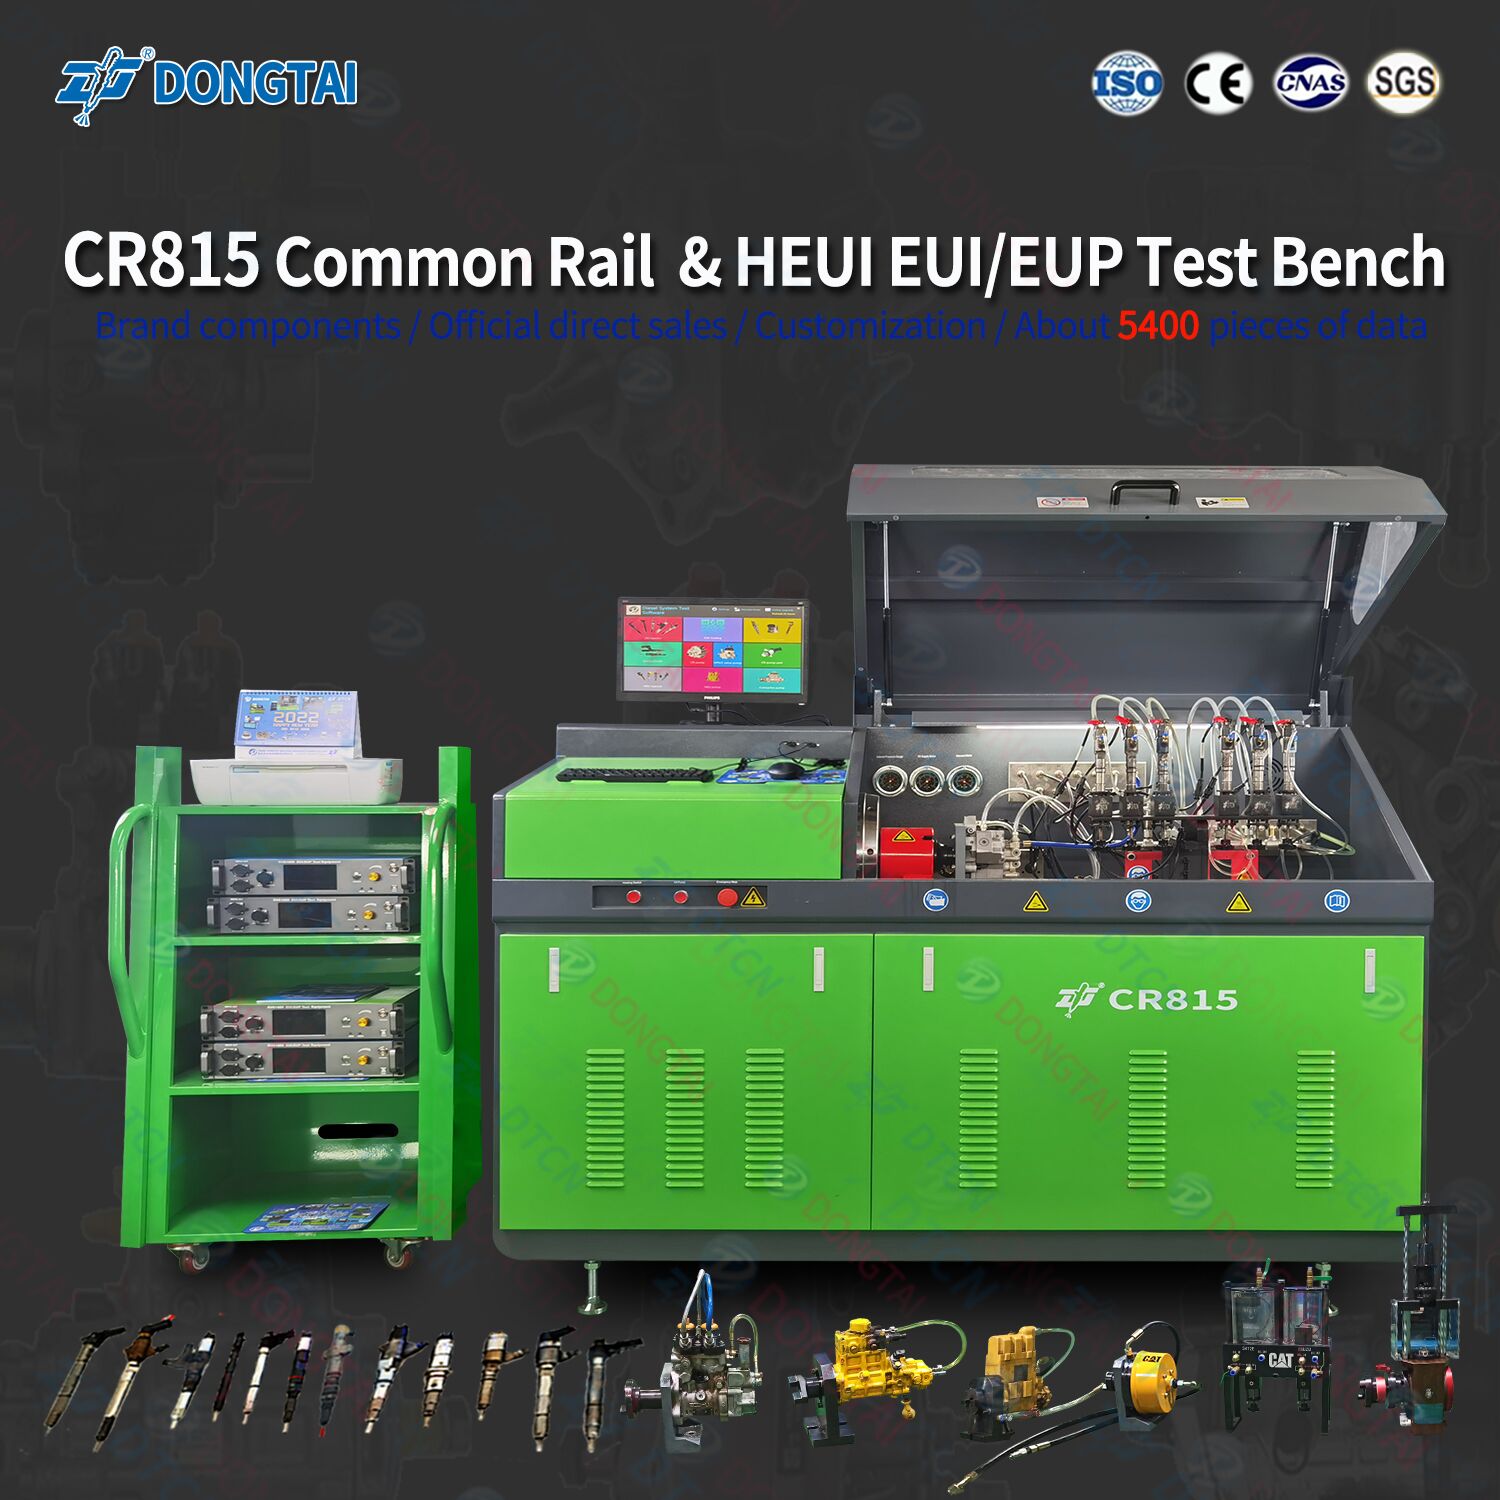 CR815 common rail injector & pump Test bench Featured Image